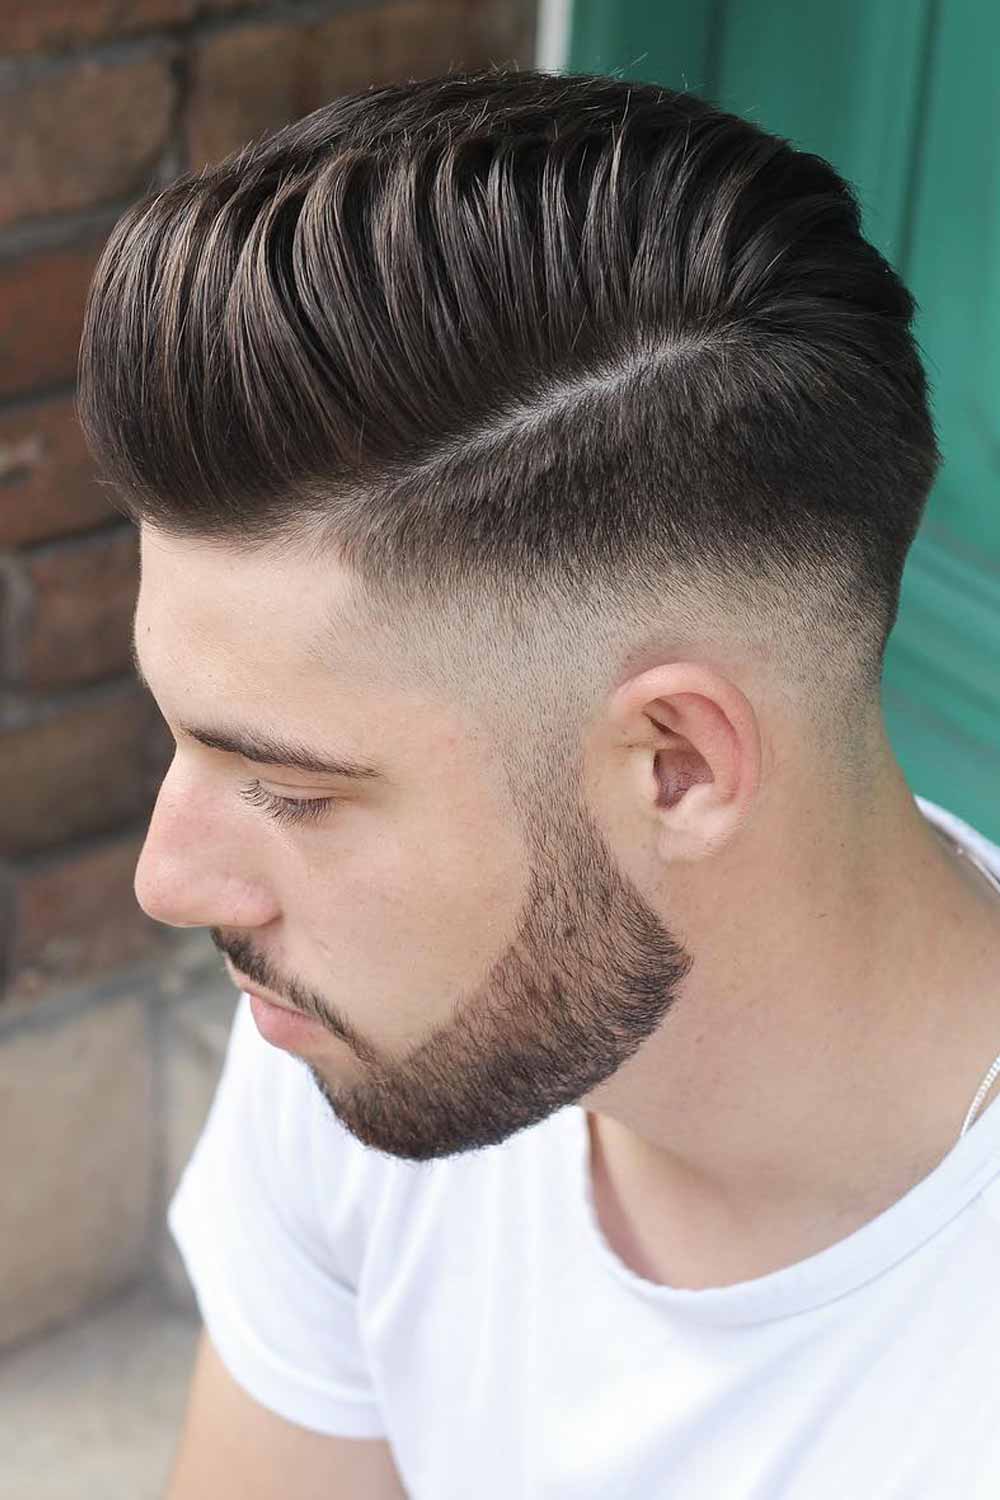 Stay cool with these slick summer hairstyles for men - The Manual